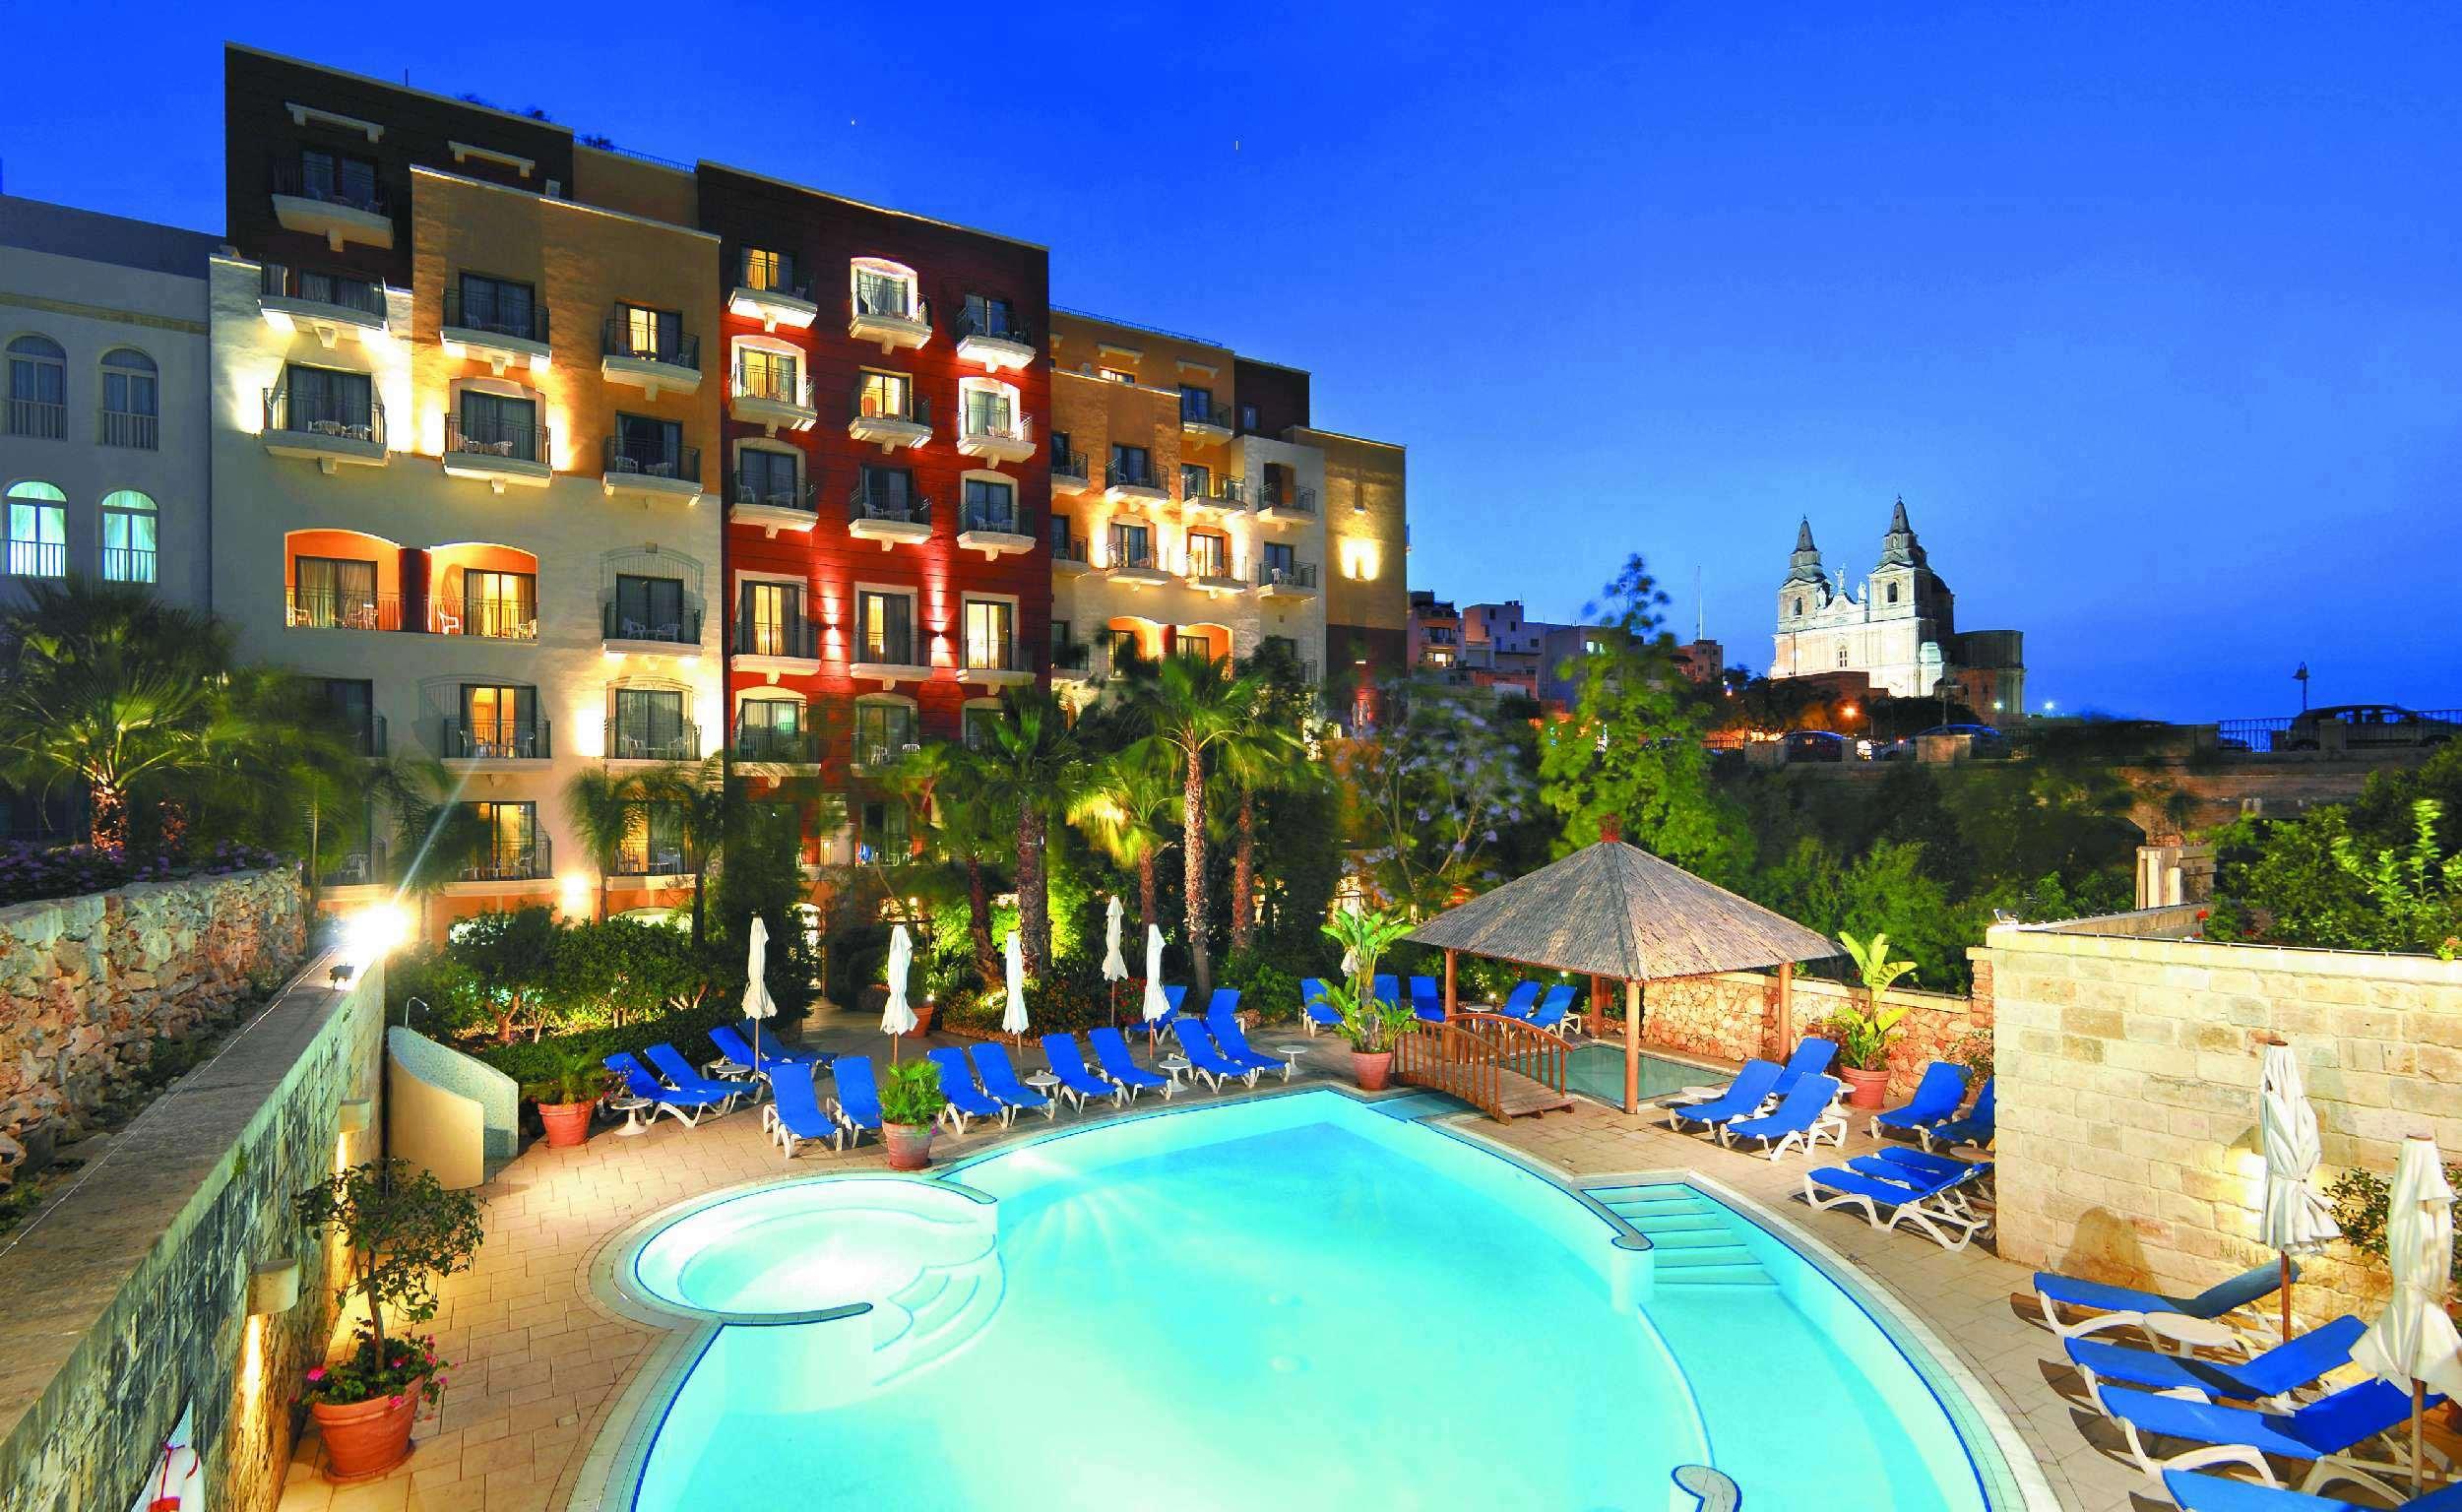 Malta Hotels: Compare Hotels in Malta from £8/night on KAYAK